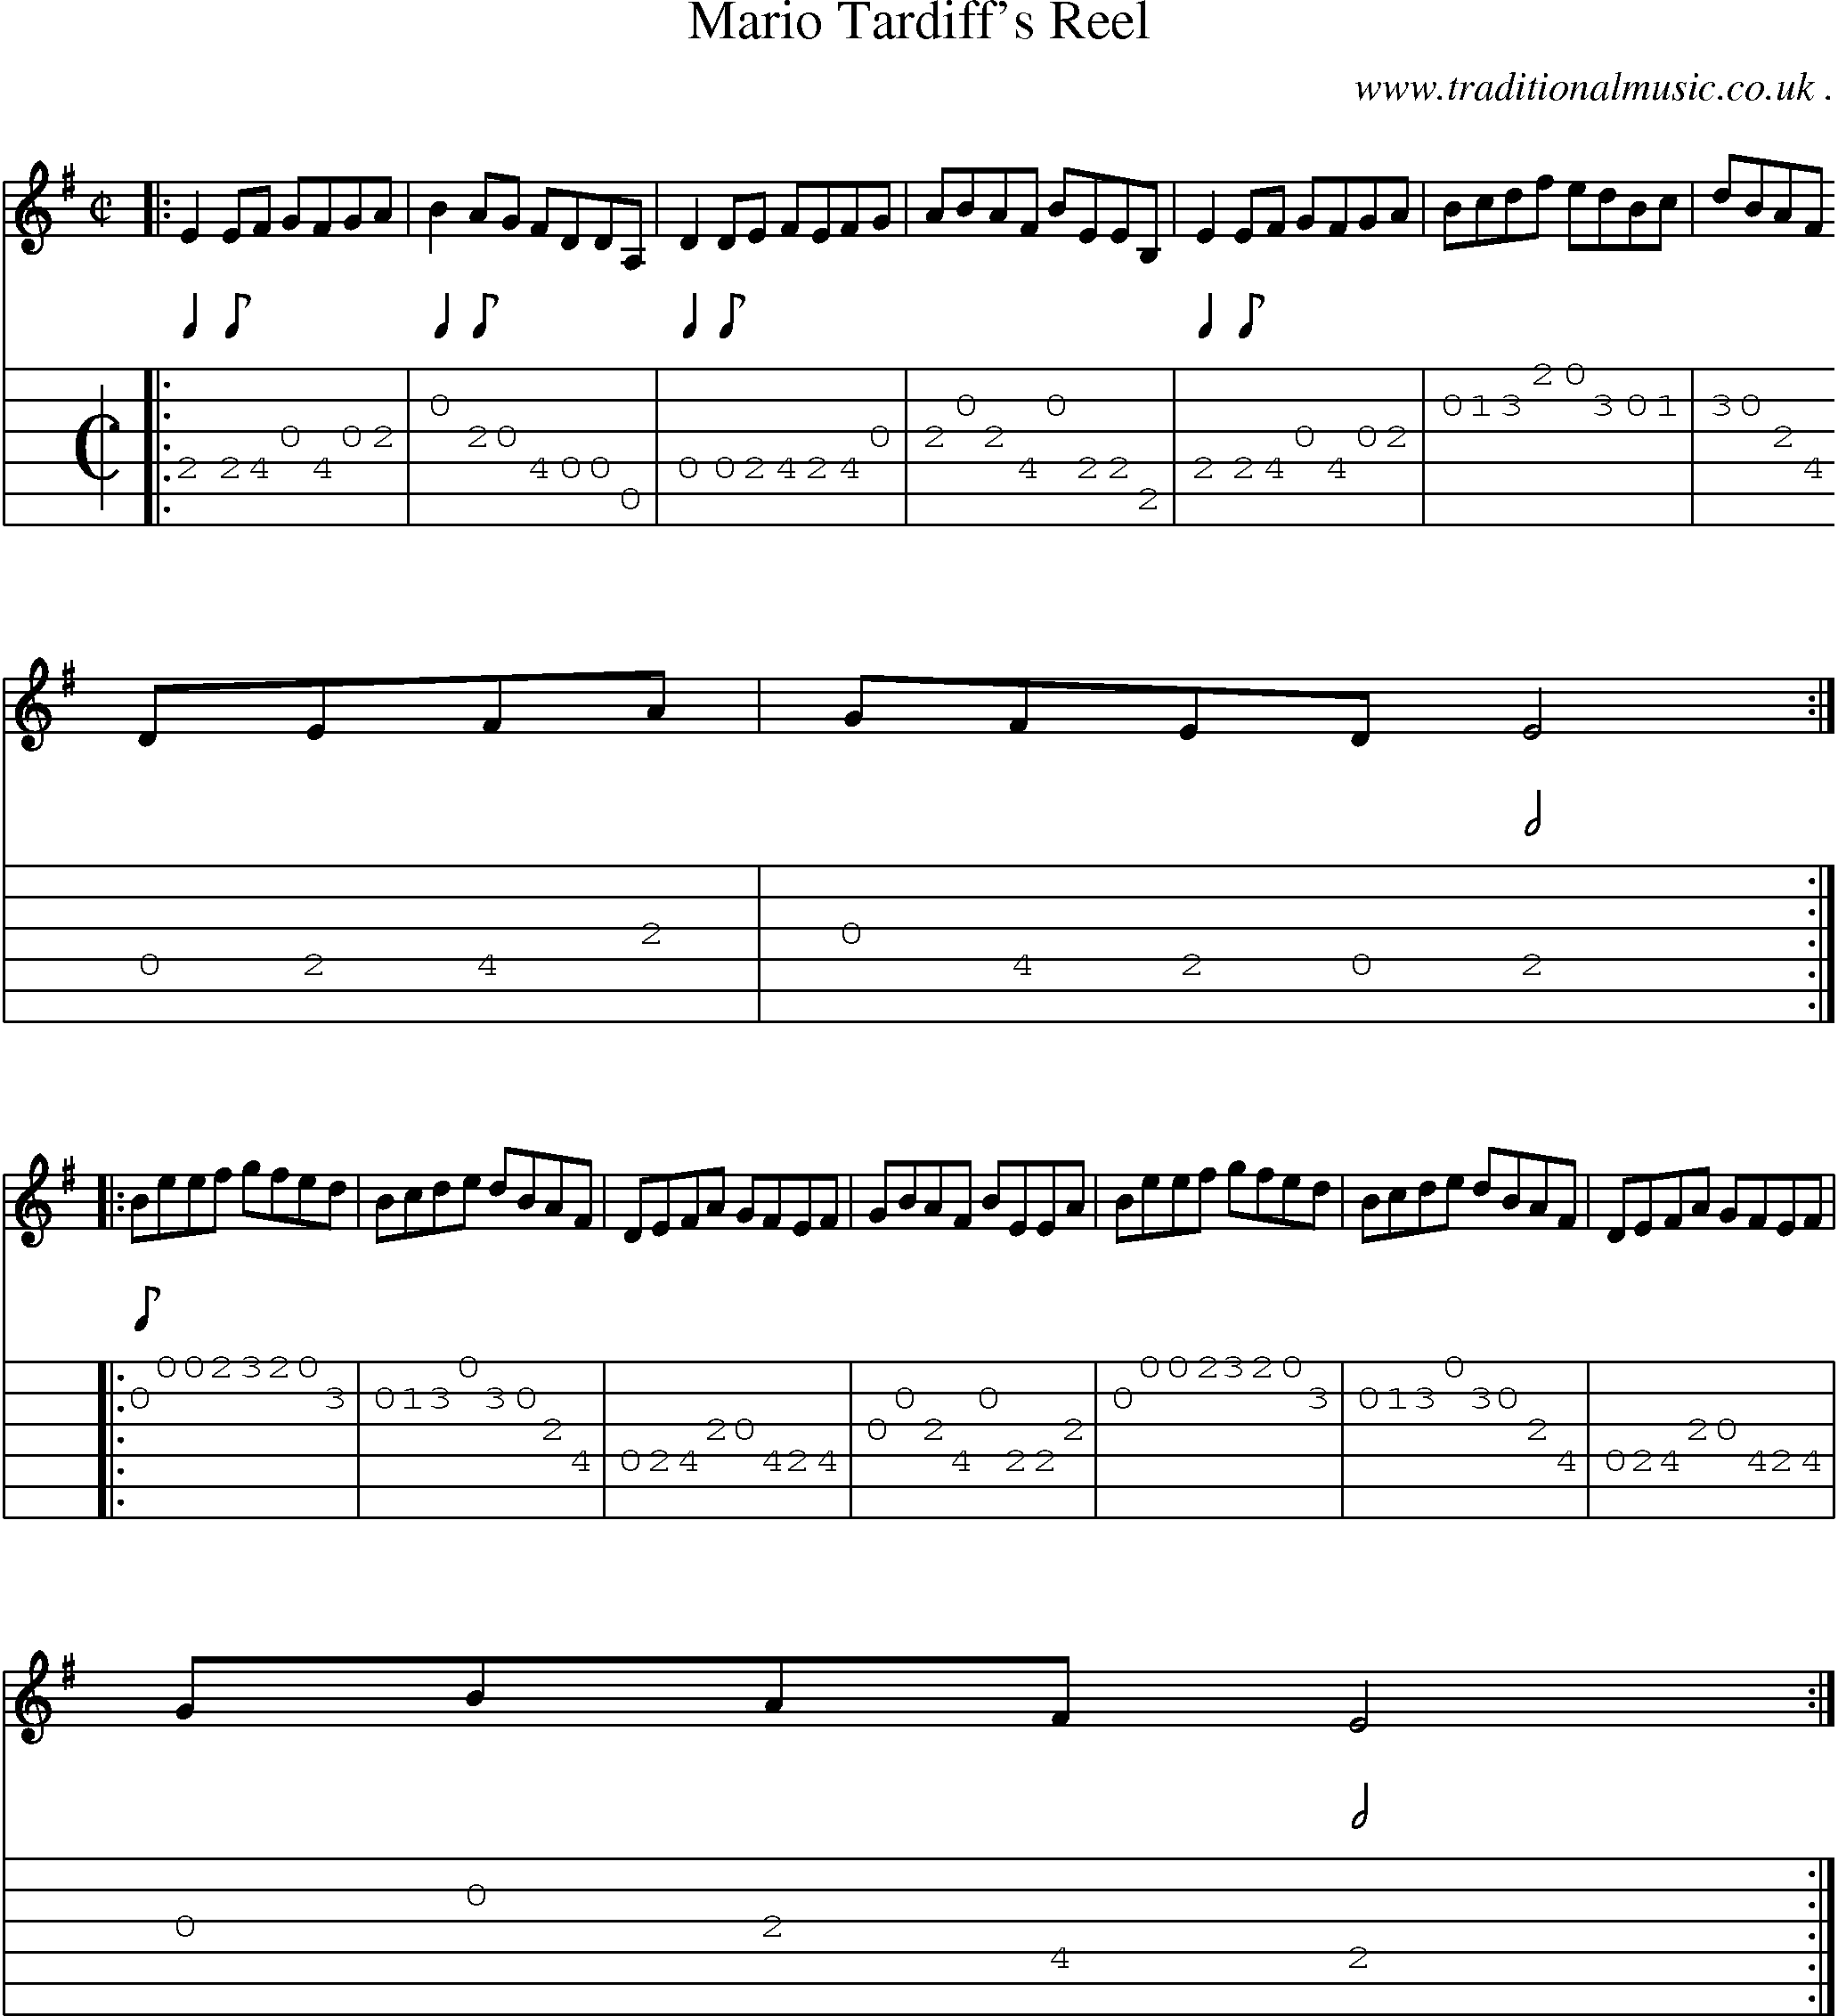 Sheet-Music and Guitar Tabs for Mario Tardiffs Reel